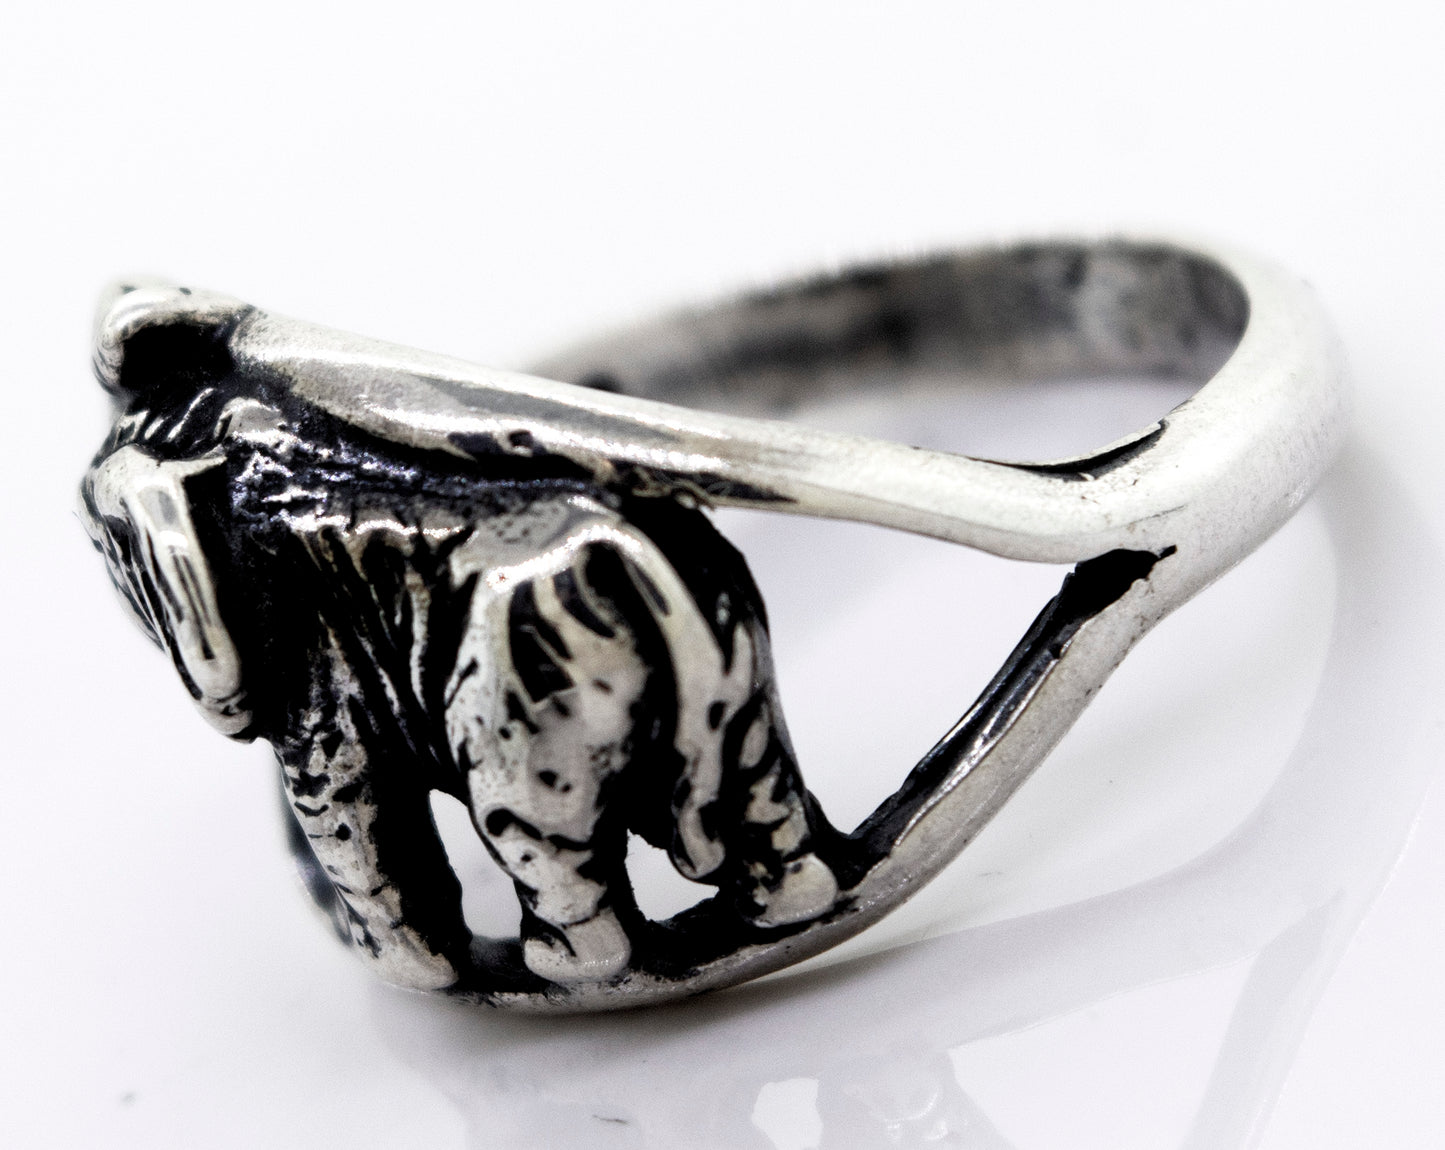 A handcrafted Super Silver American Made Elephant Ring with an enchanting elephant design.